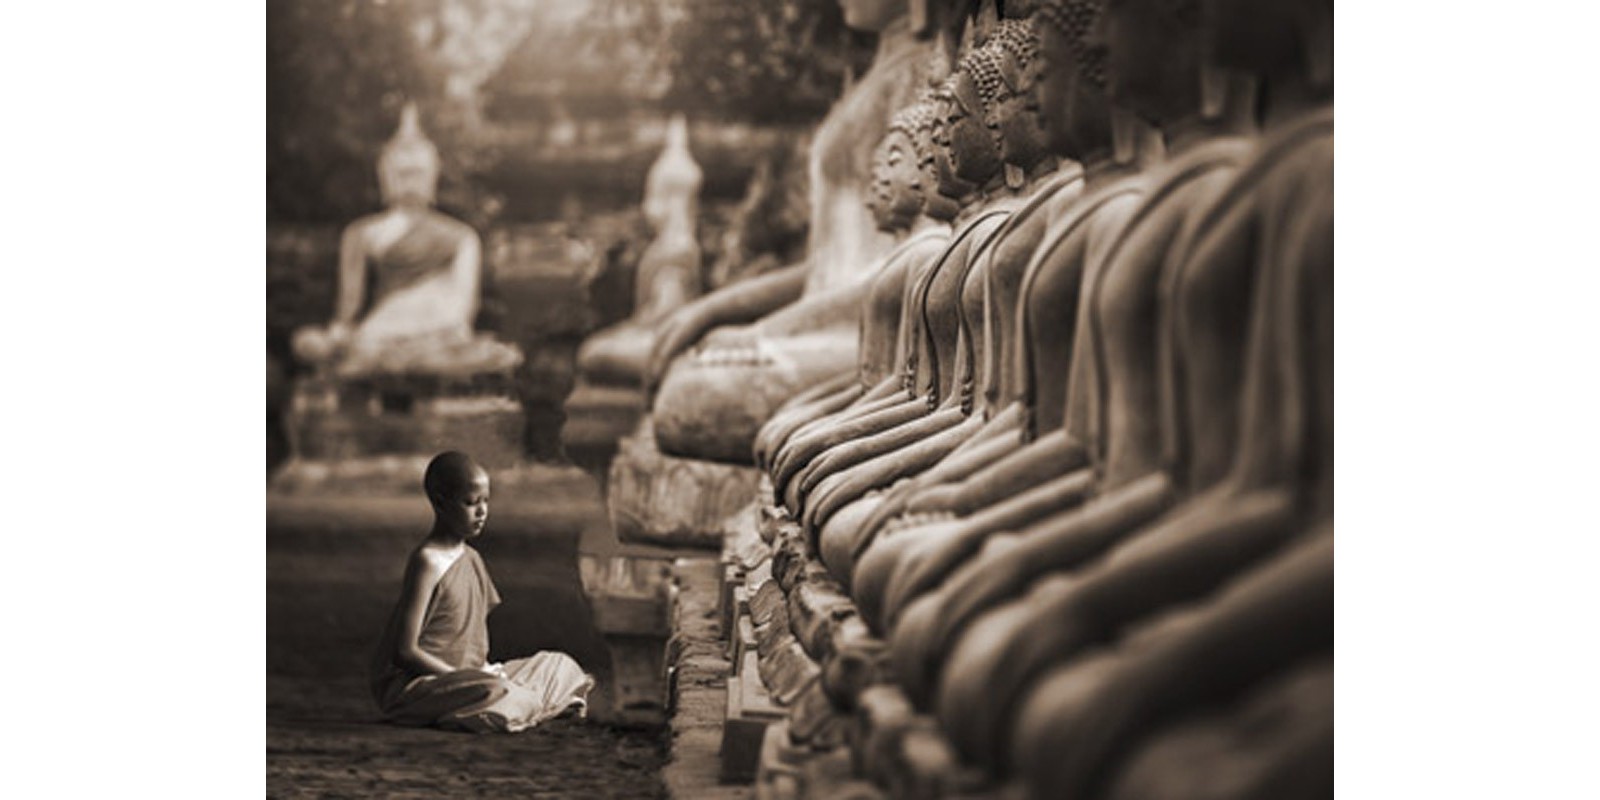 Pangea Images - Young Buddhist Monk praying, Thailand (sepia)